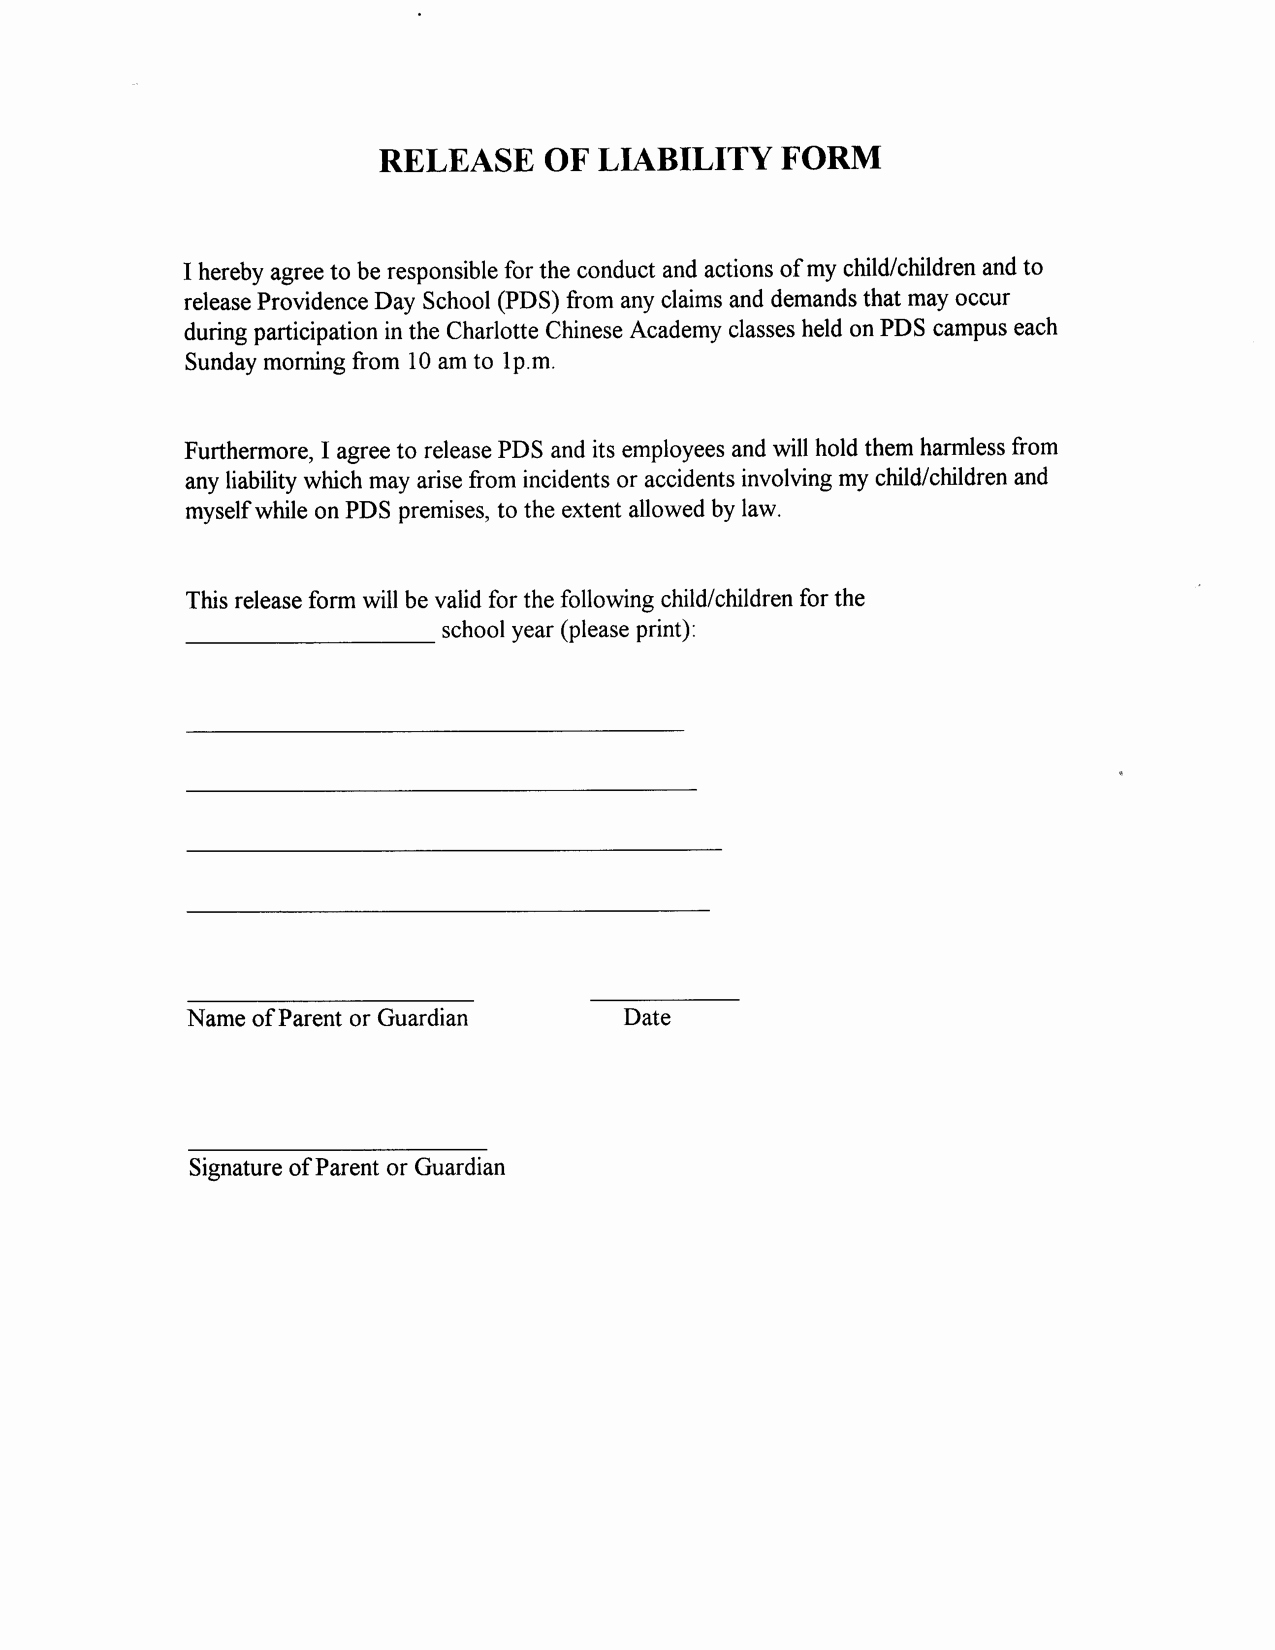 General Release form Template Beautiful Liability Release form Template In Images Release Of